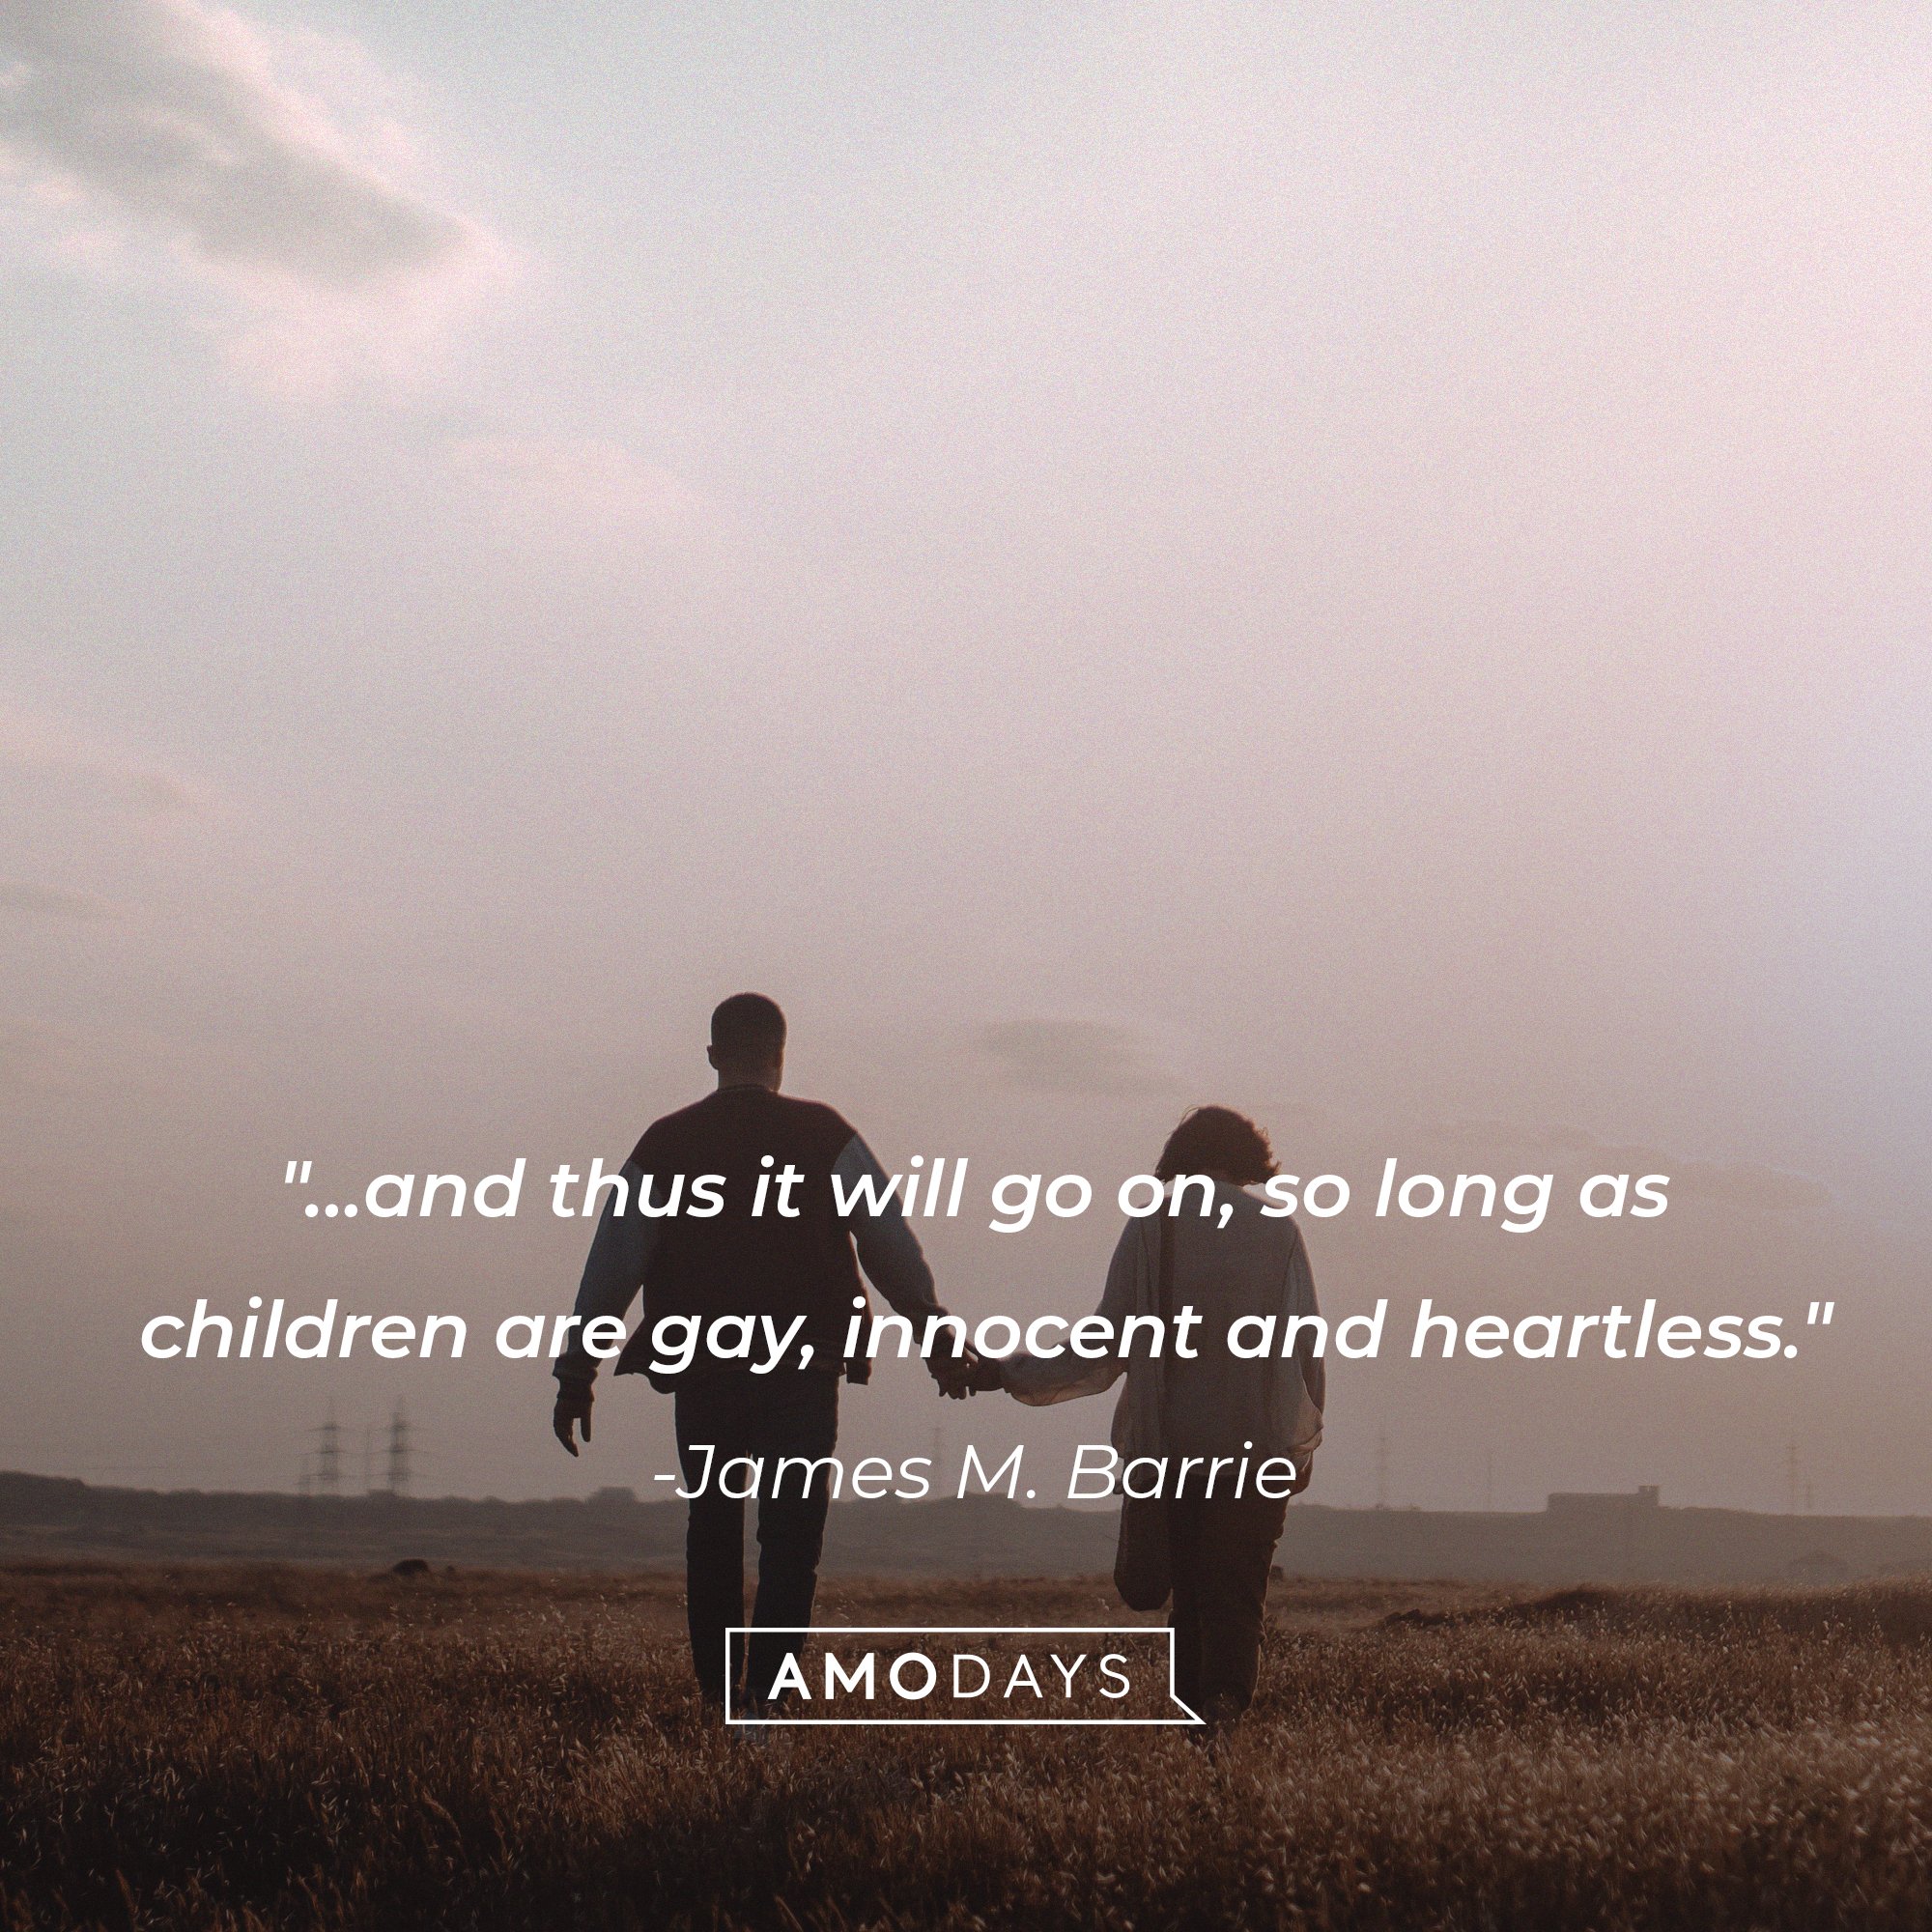 James M. Barrie's quote: "…and thus it will go on, so long as children are gay, innocent and heartless." | Image: AmoDays